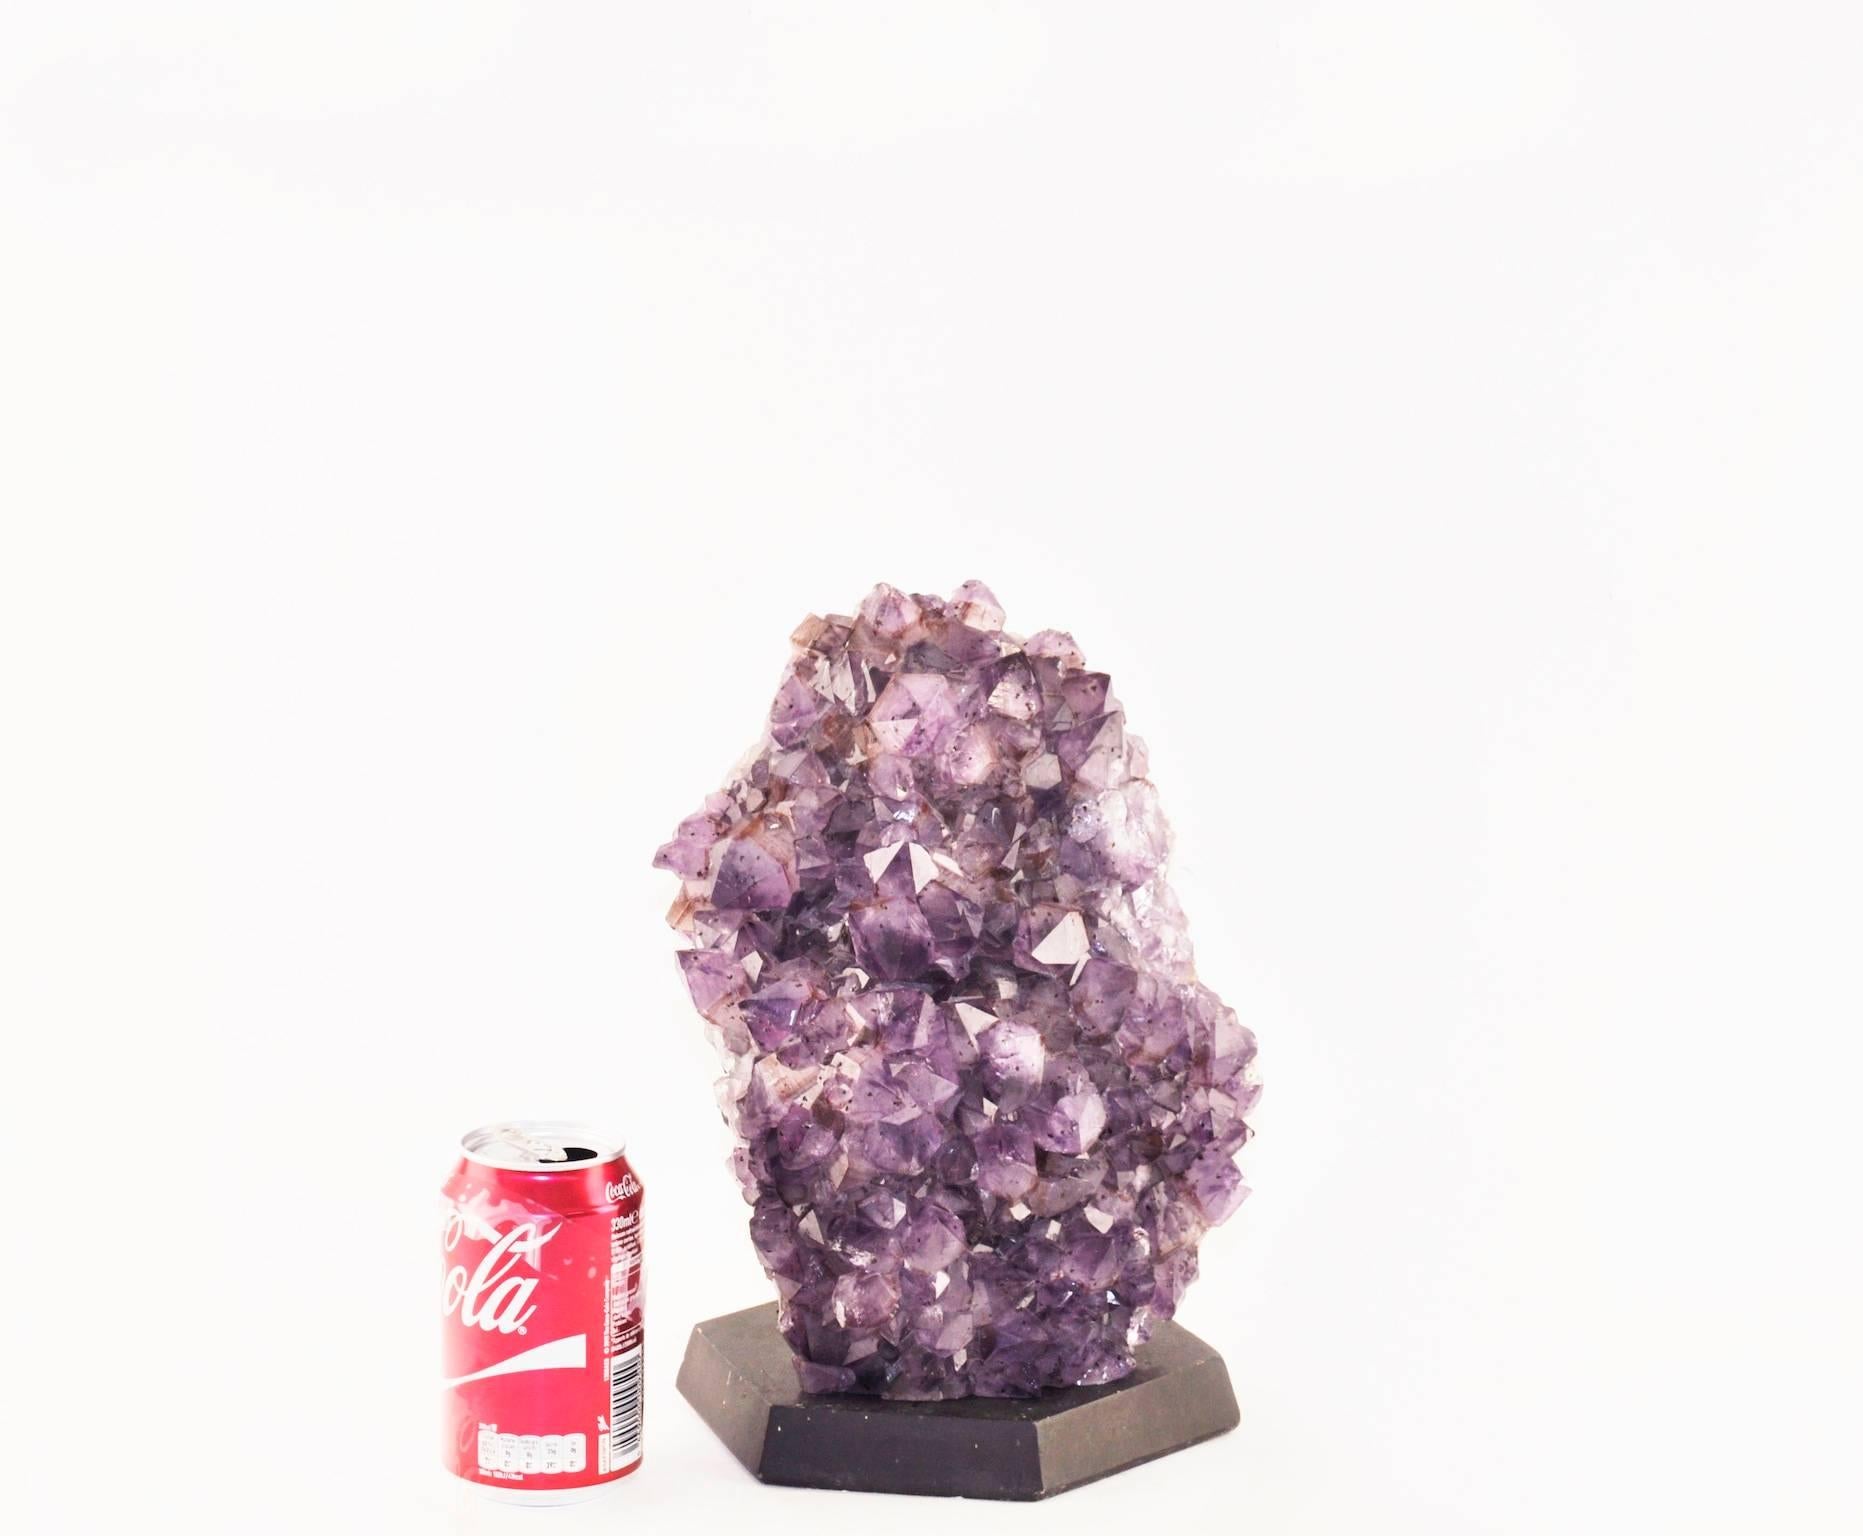 A substantial Amethyst mounted on a wood base.